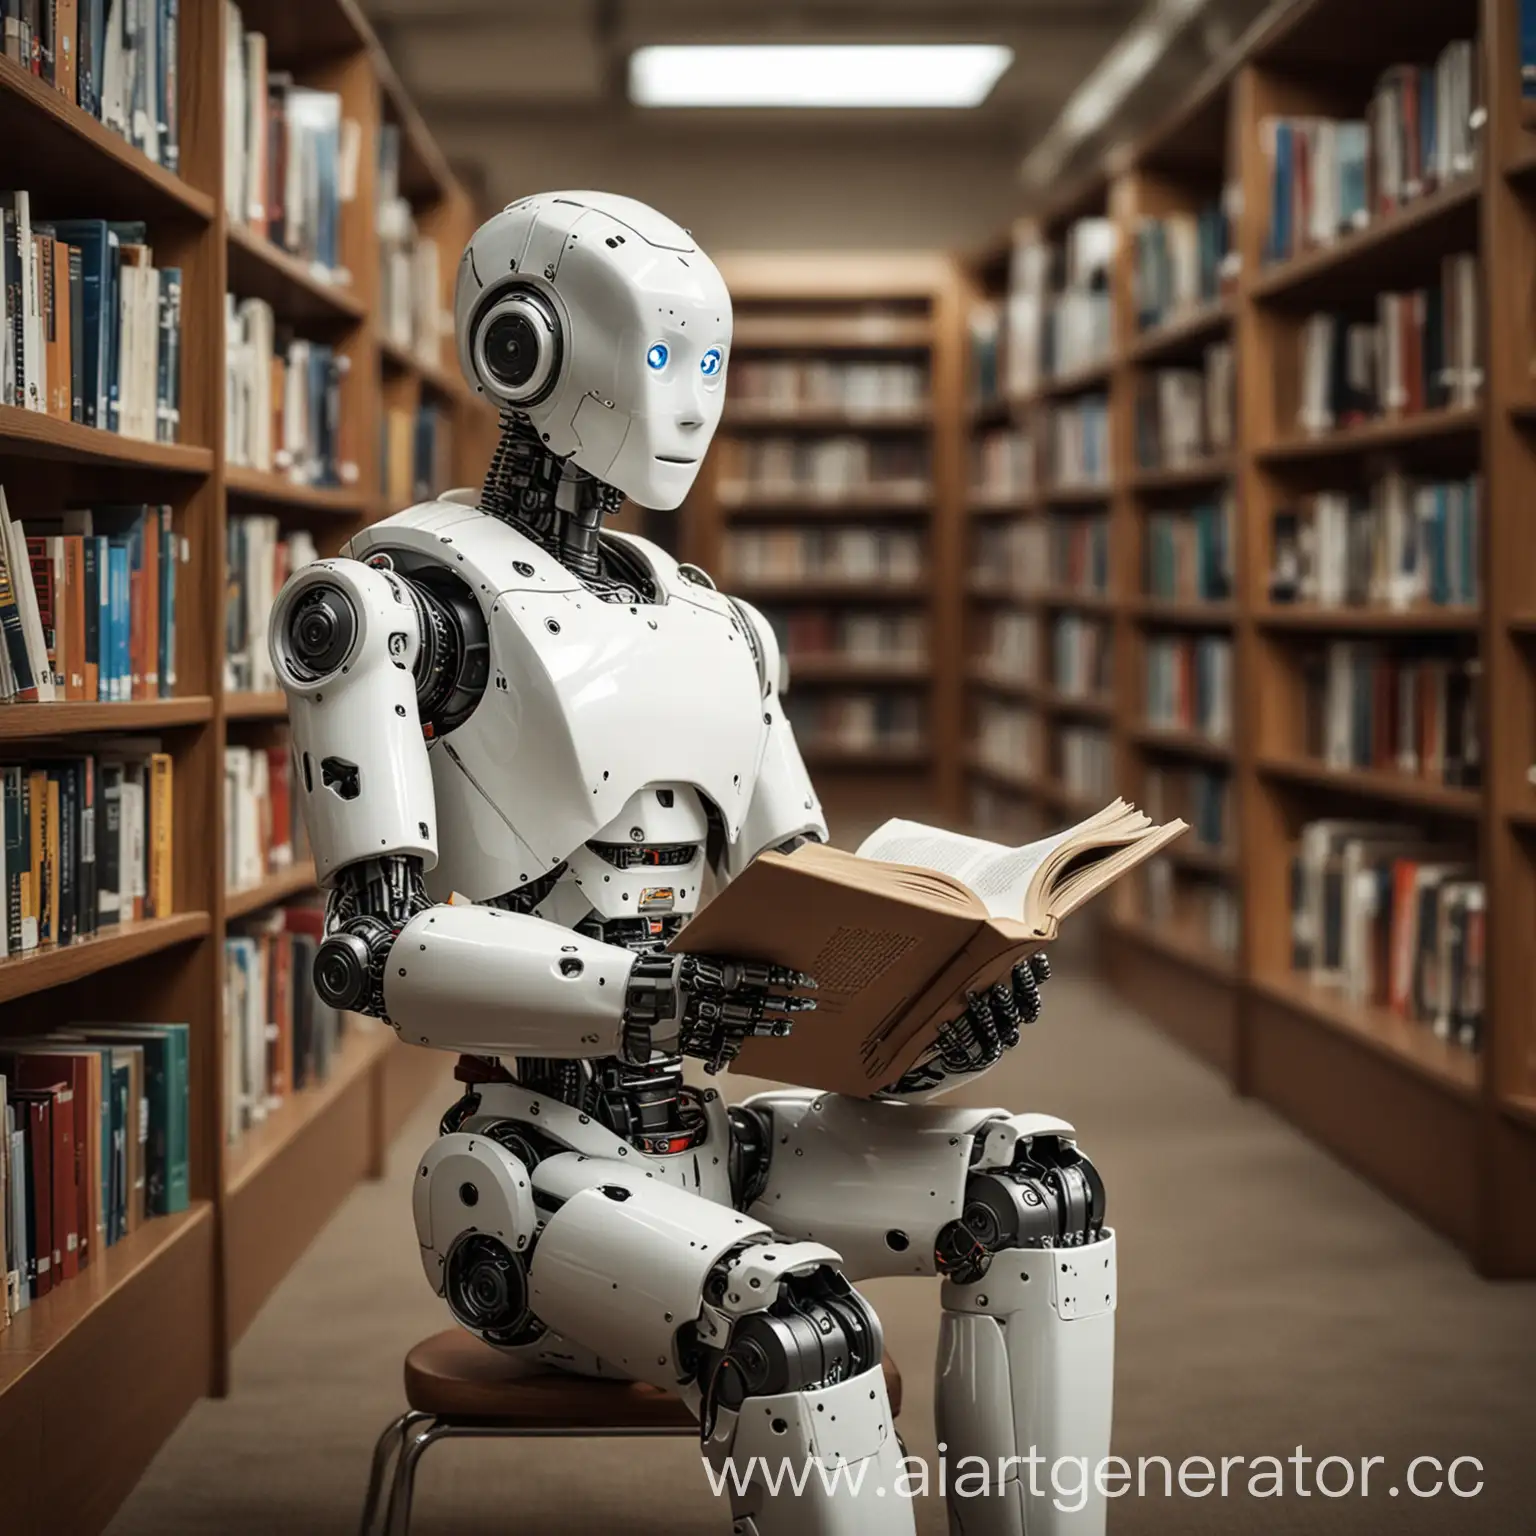 A robot reads a book in the library